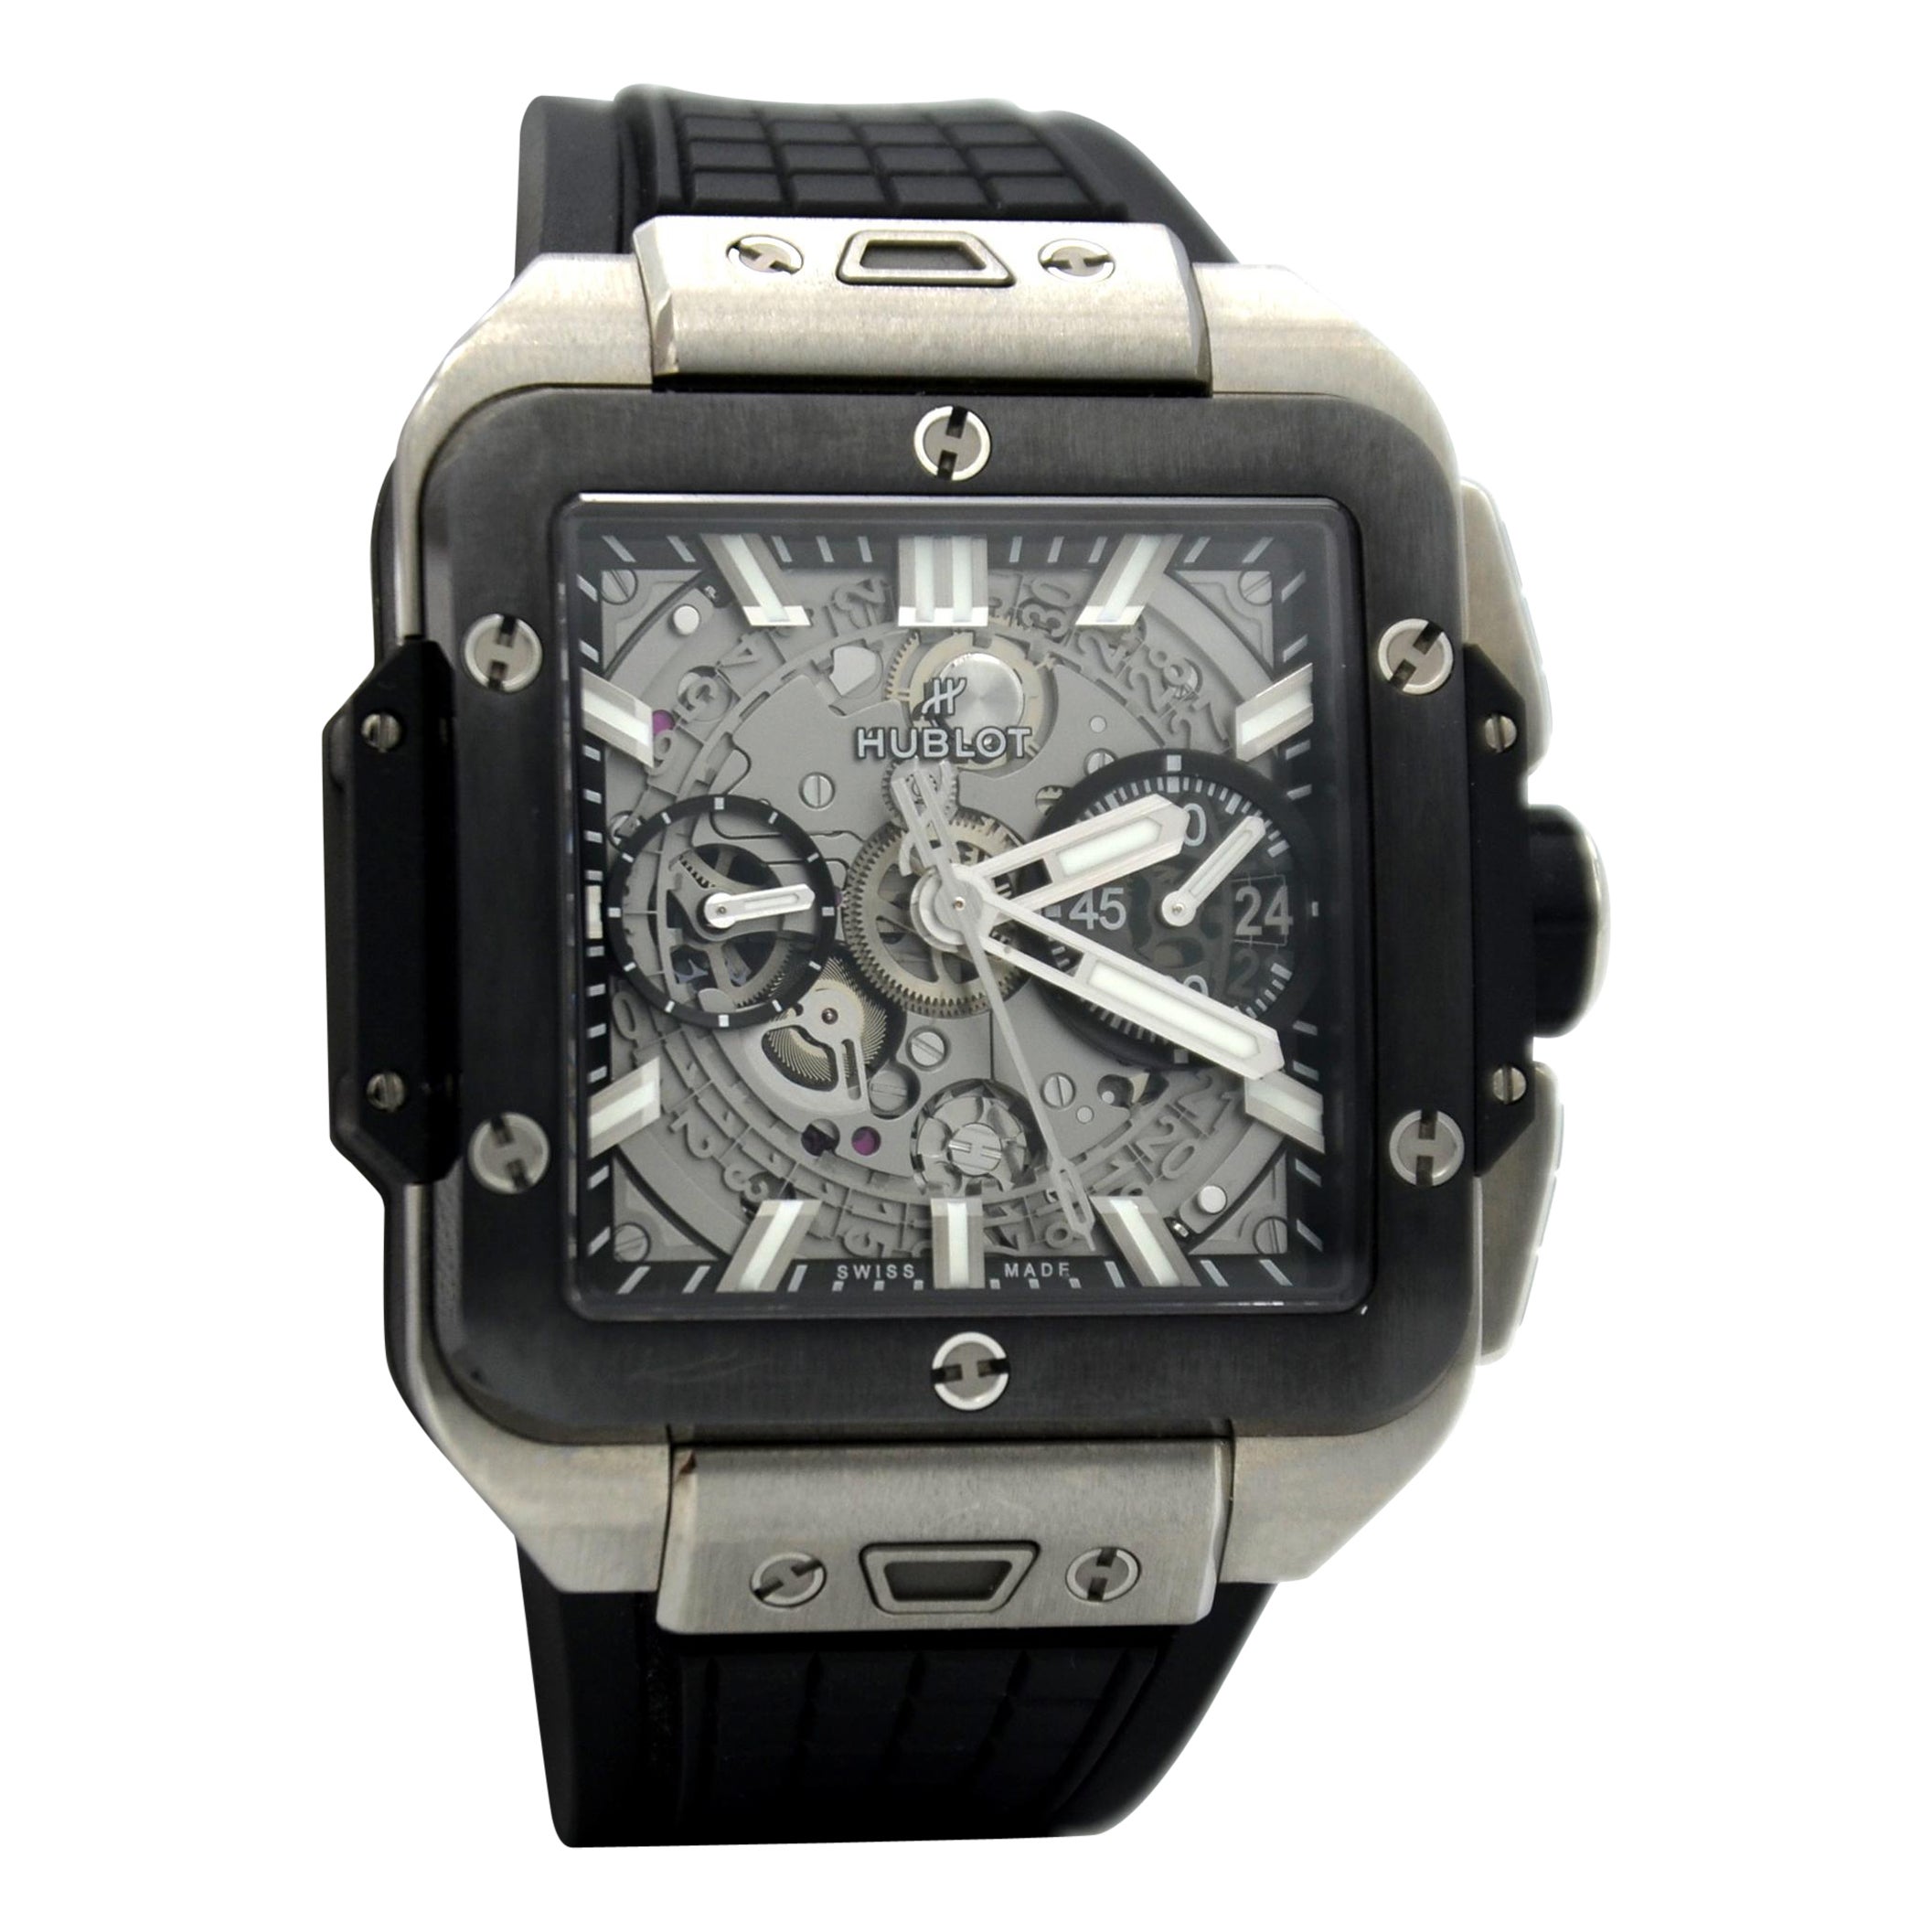 Hublot Square Bang 42mm, Ref. 821.NM.0170.RX For Sale